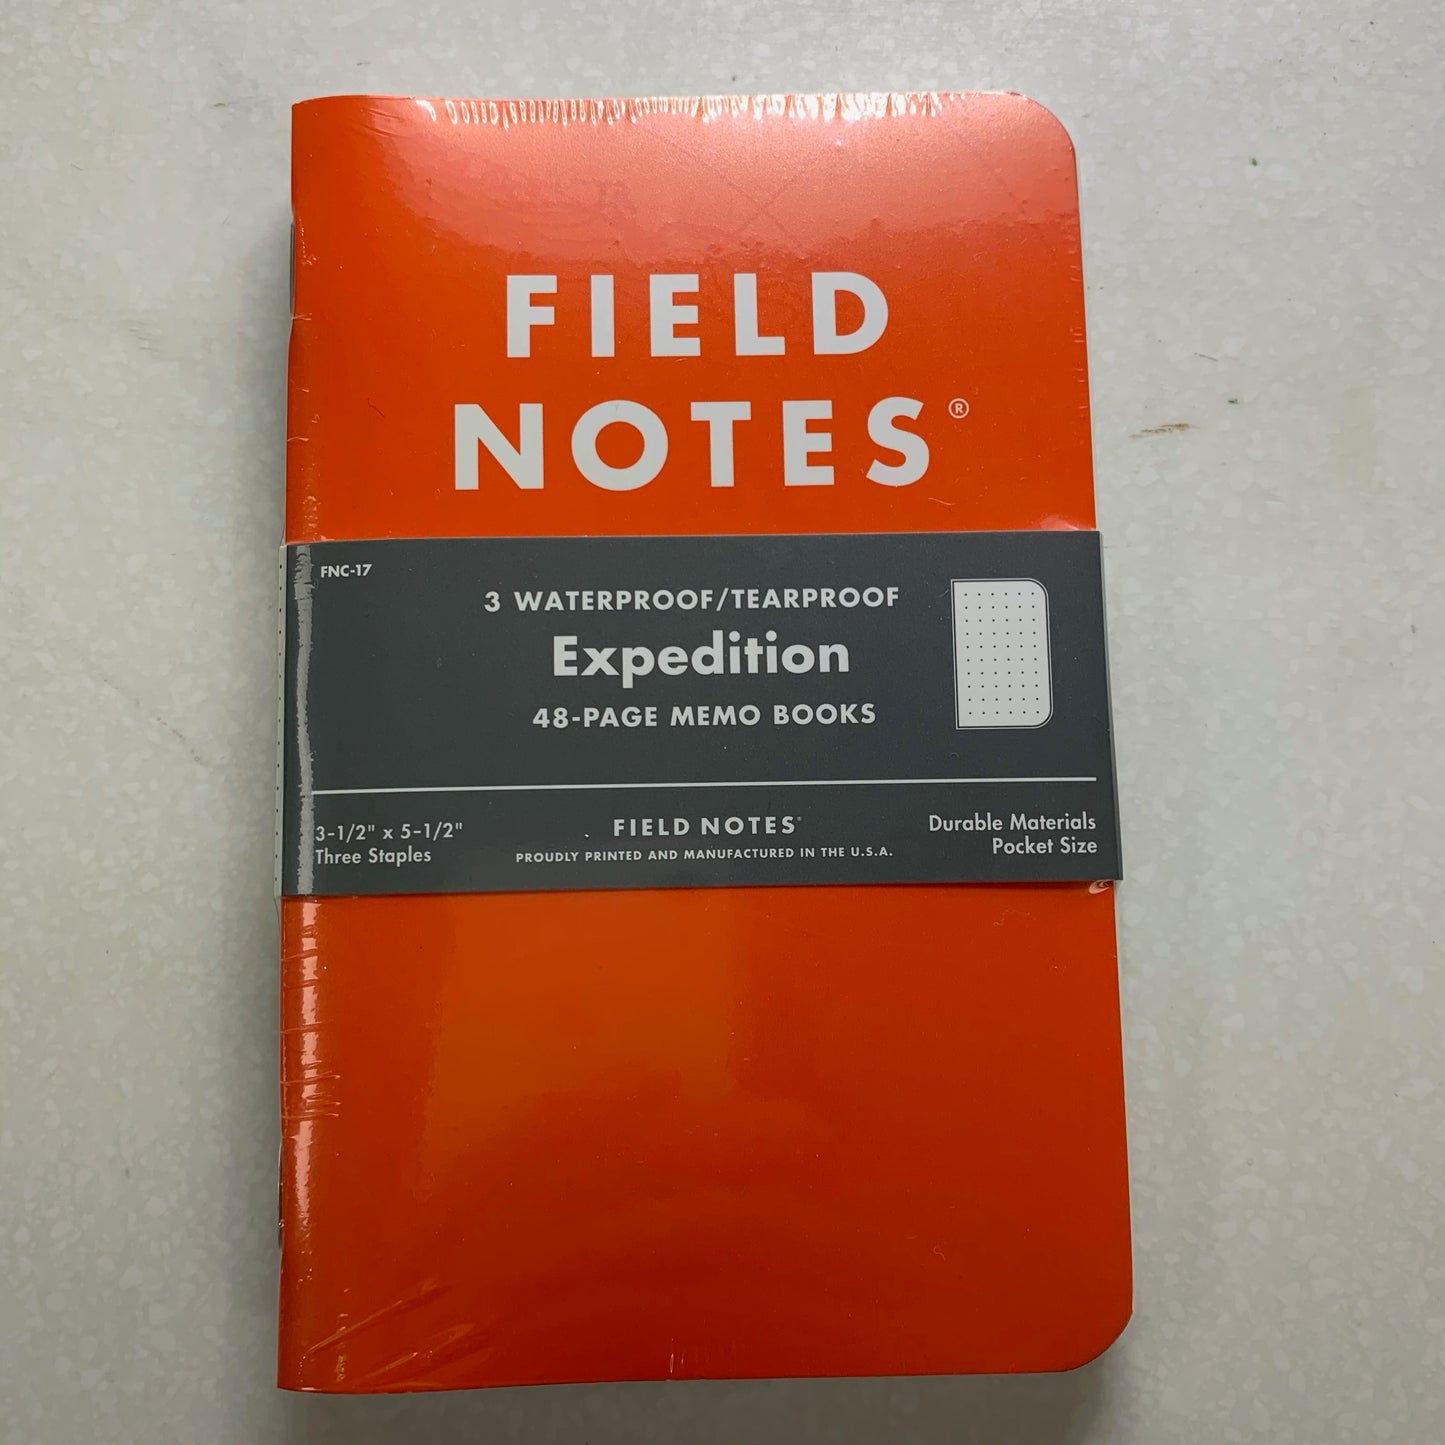 Field Notes Expedition Memo Books